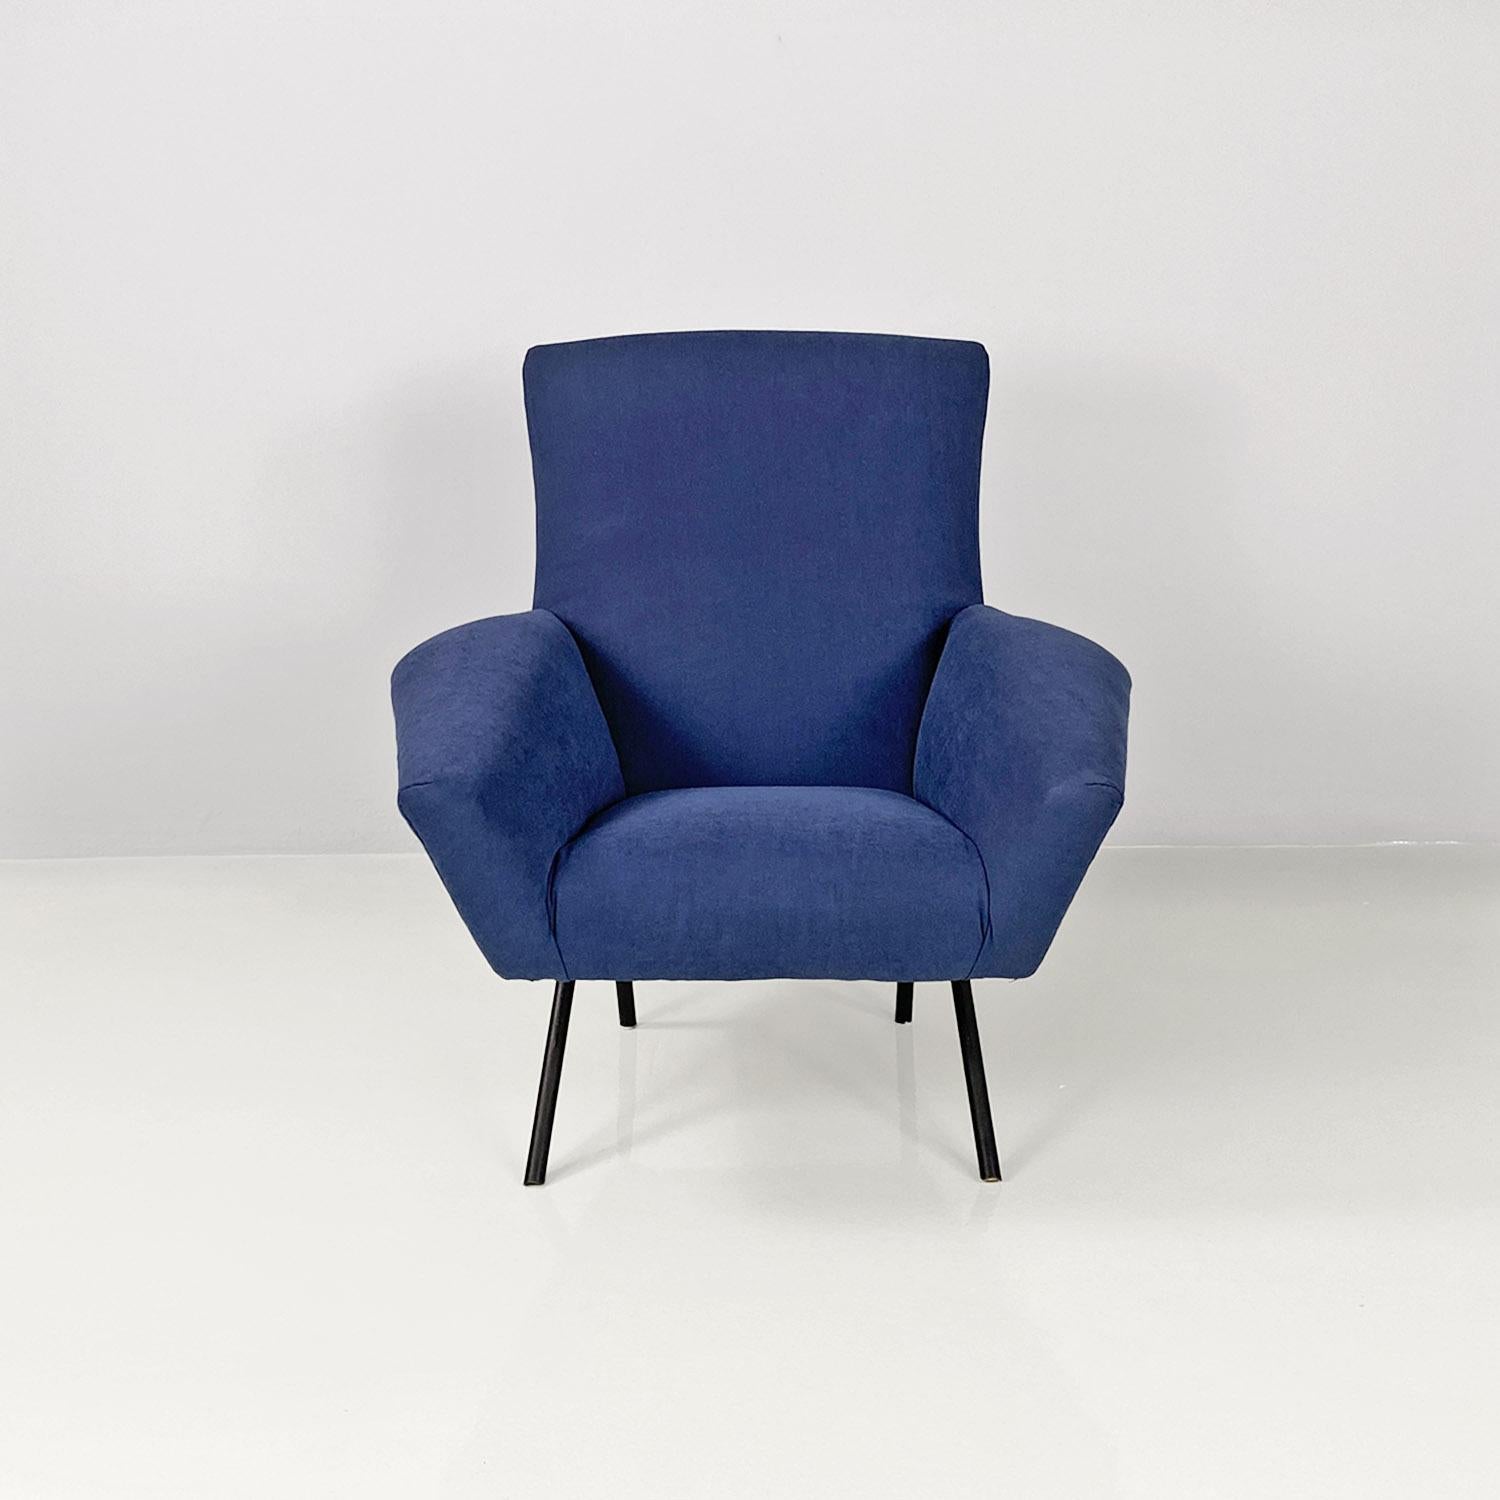 Italian mid-century modern blue fabric and black metal armchairs, 1960s In Good Condition For Sale In MIlano, IT